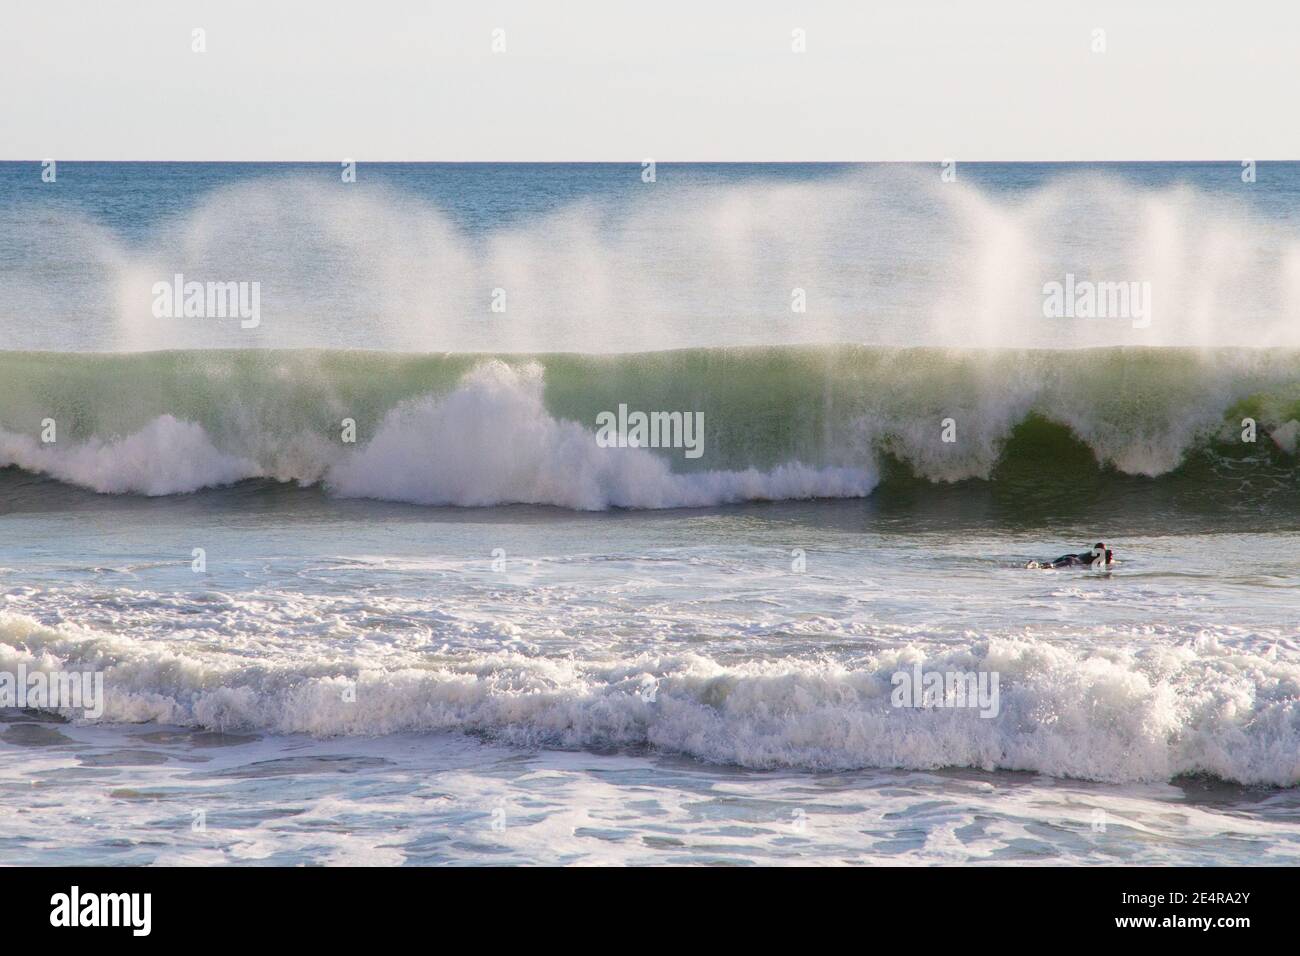 Surfer surfing wave jumping on surf board. Mallorca Spain Stock Photo